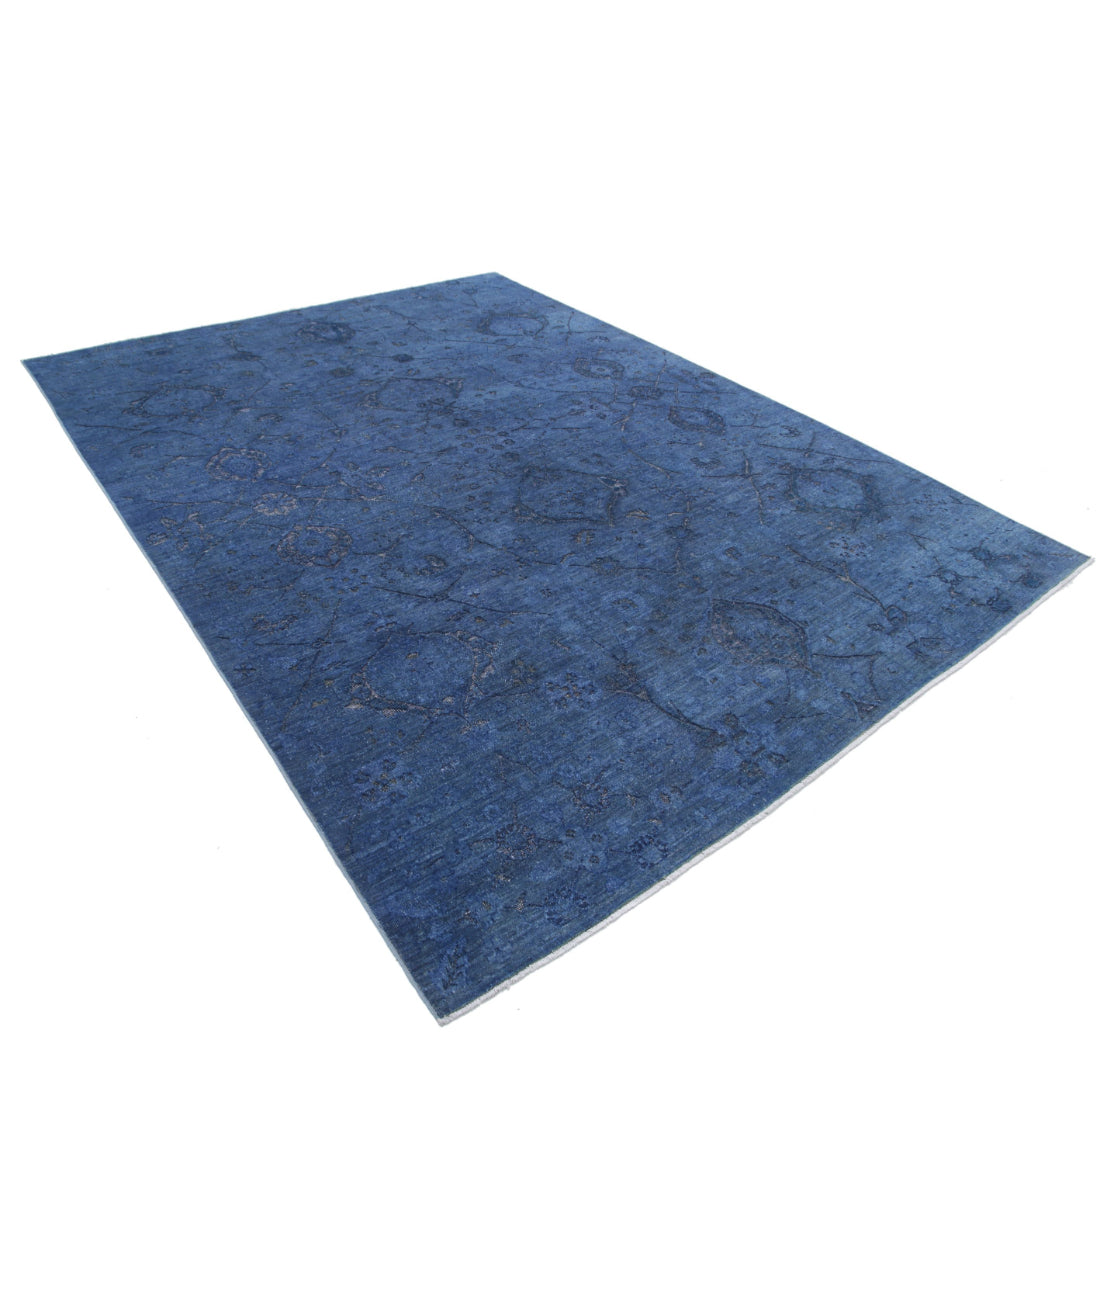 Hand Knotted Onyx Wool Rug - 8'0'' x 10'8'' 8'0'' x 10'8'' (240 X 320) / Blue / Blue